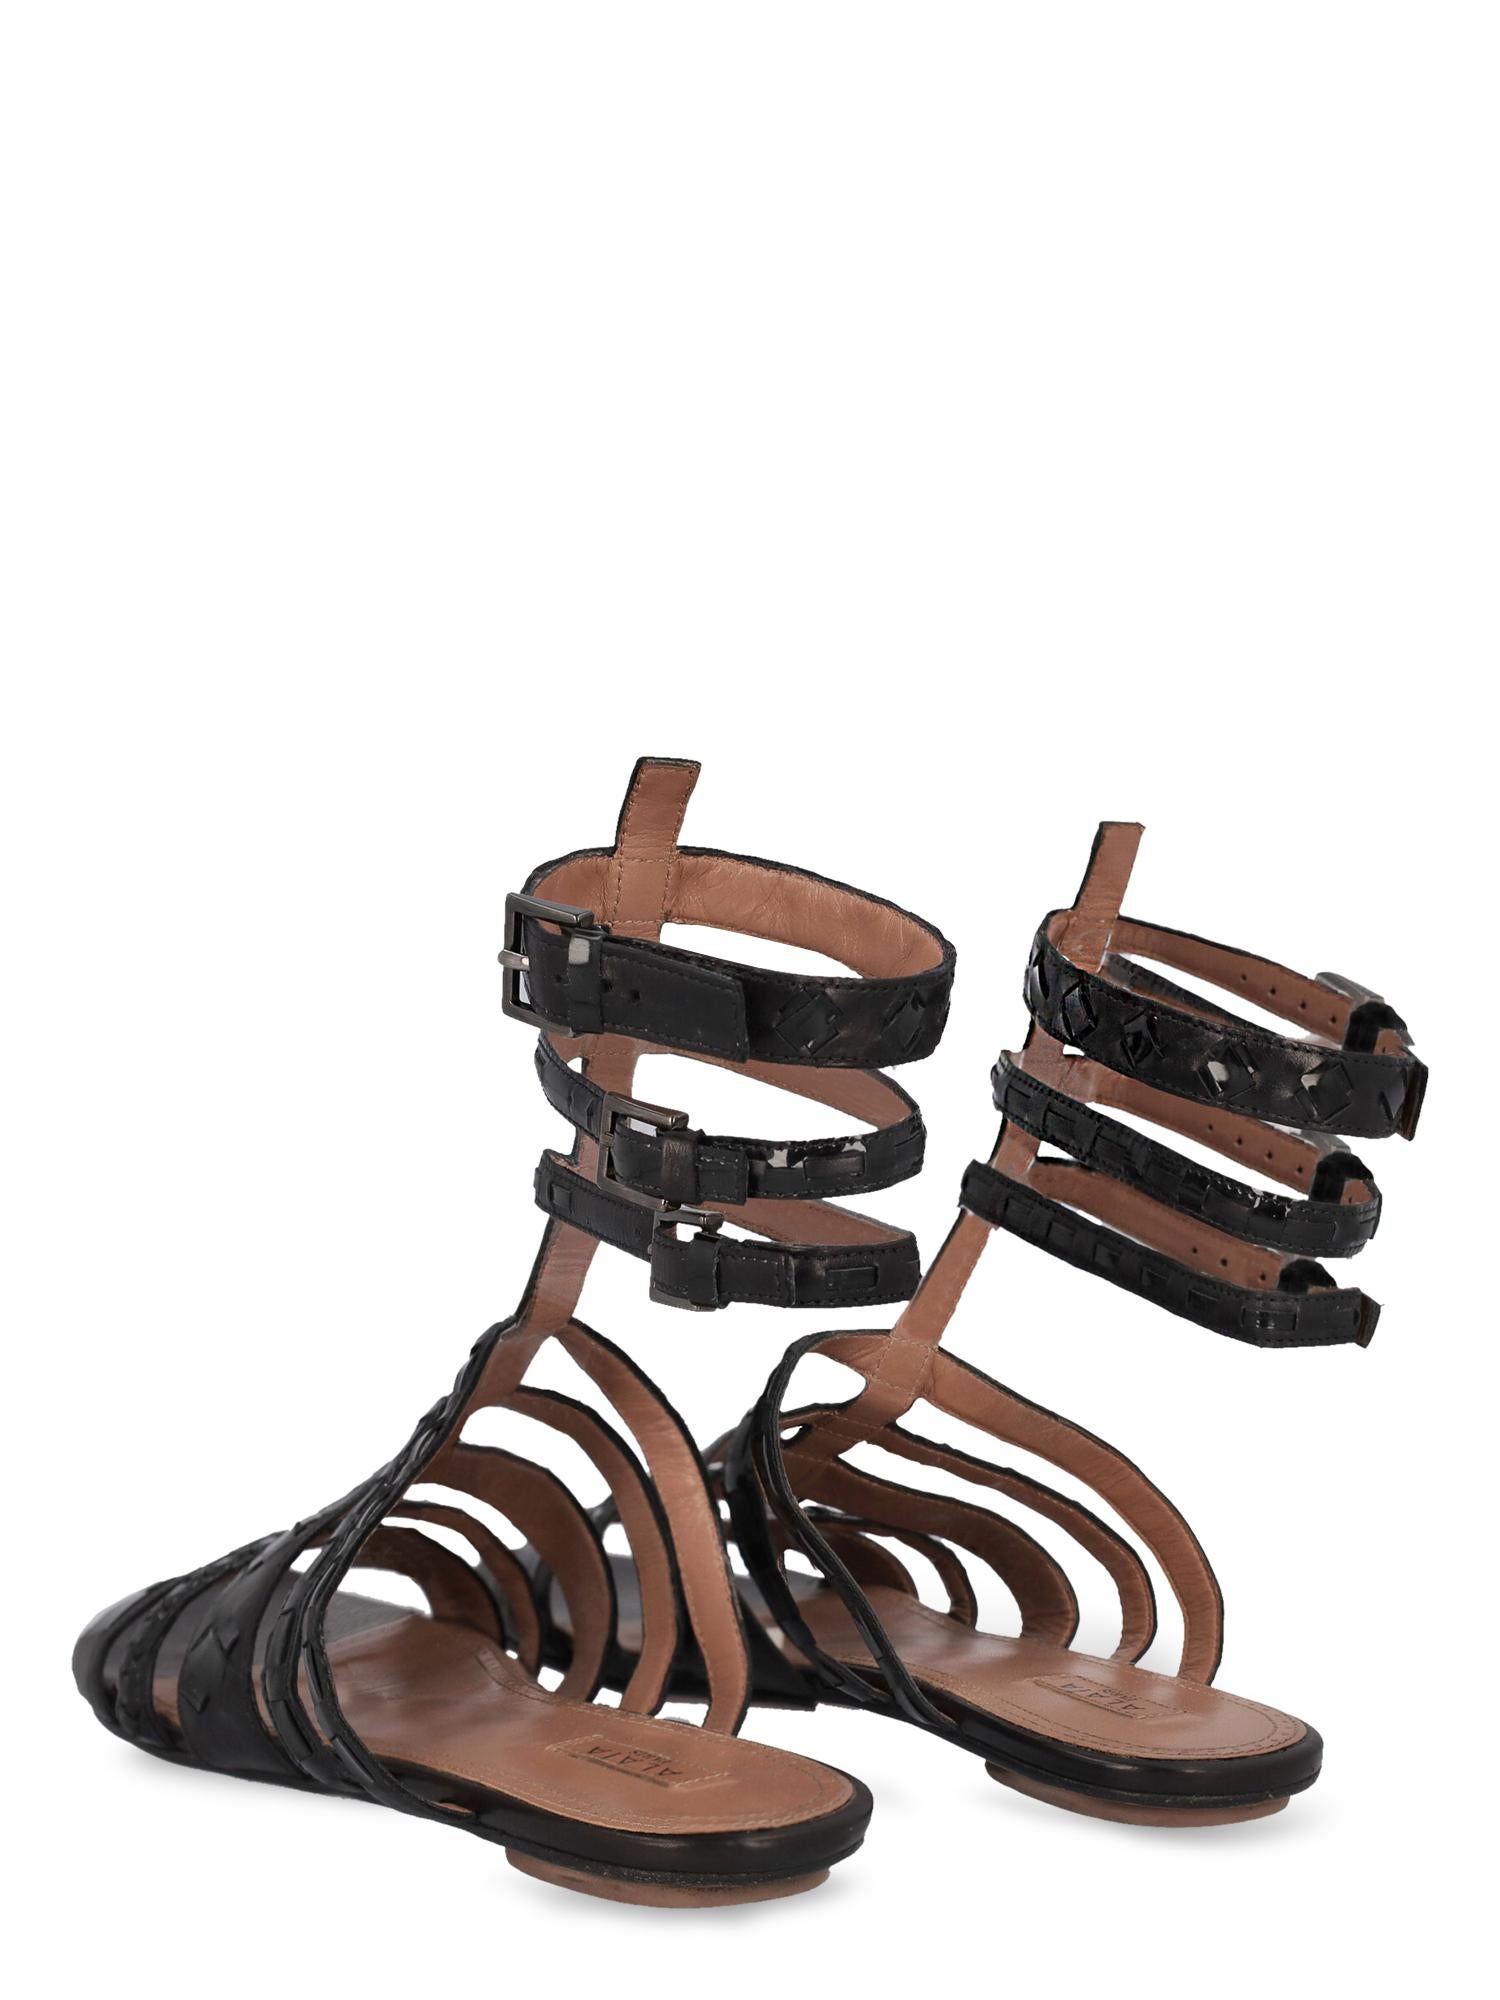 Alaia Women Sandals Black Leather EU 38 In Fair Condition For Sale In Milan, IT